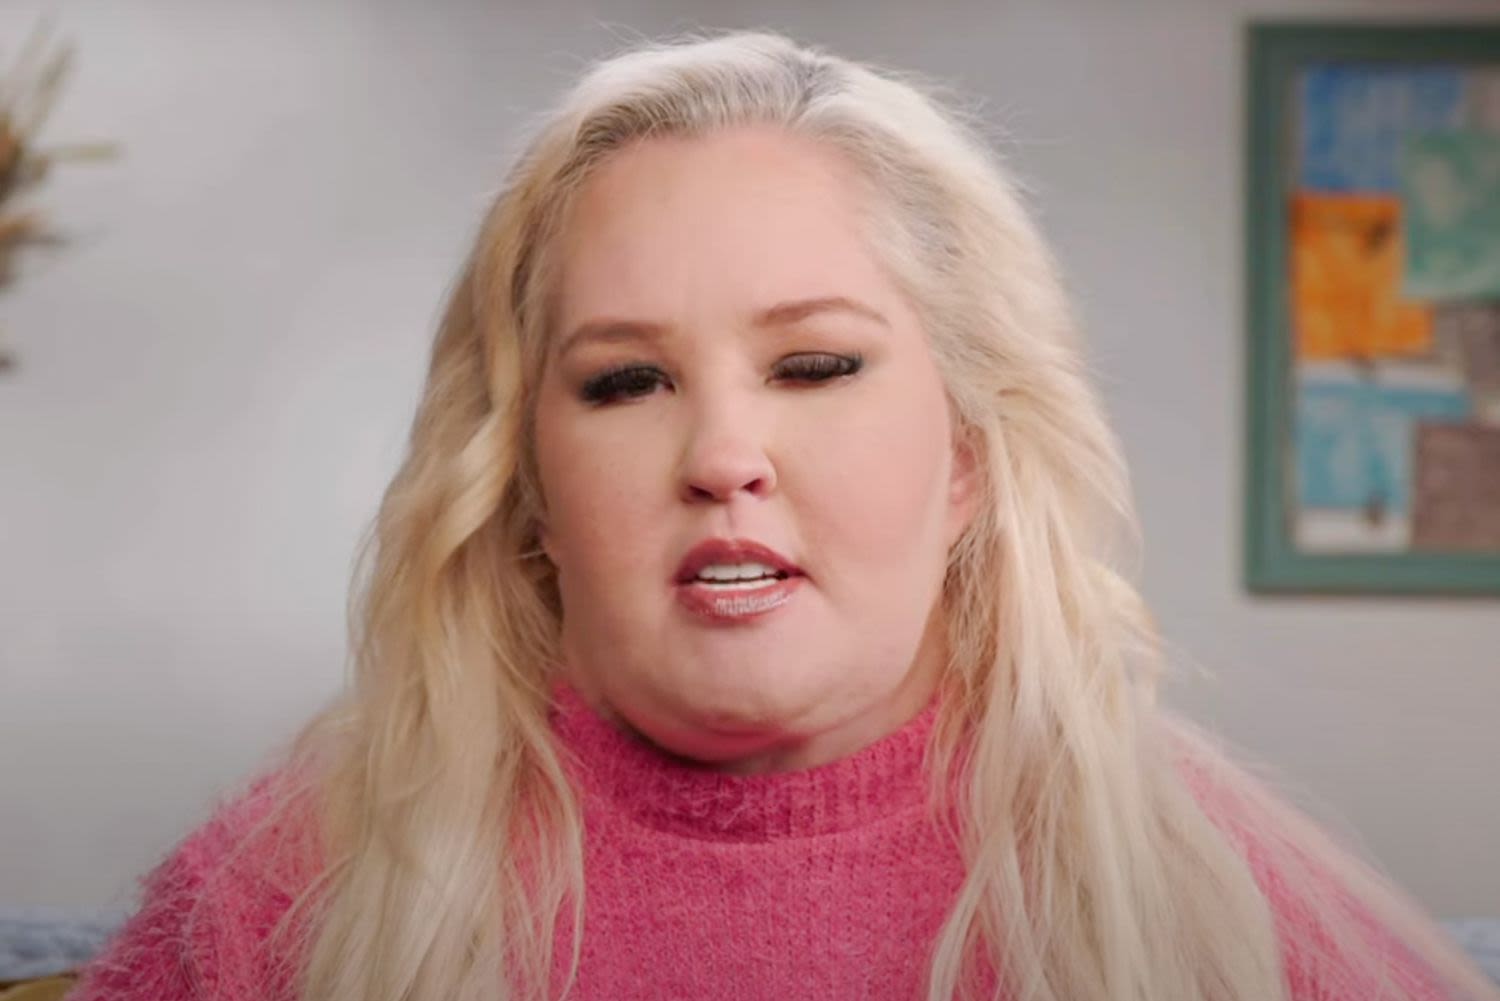 Mama June Shannon Says Anna Cardwell Won't Find 'Peace' Until She Gets Custody of Kaitlyn (Exclusive)